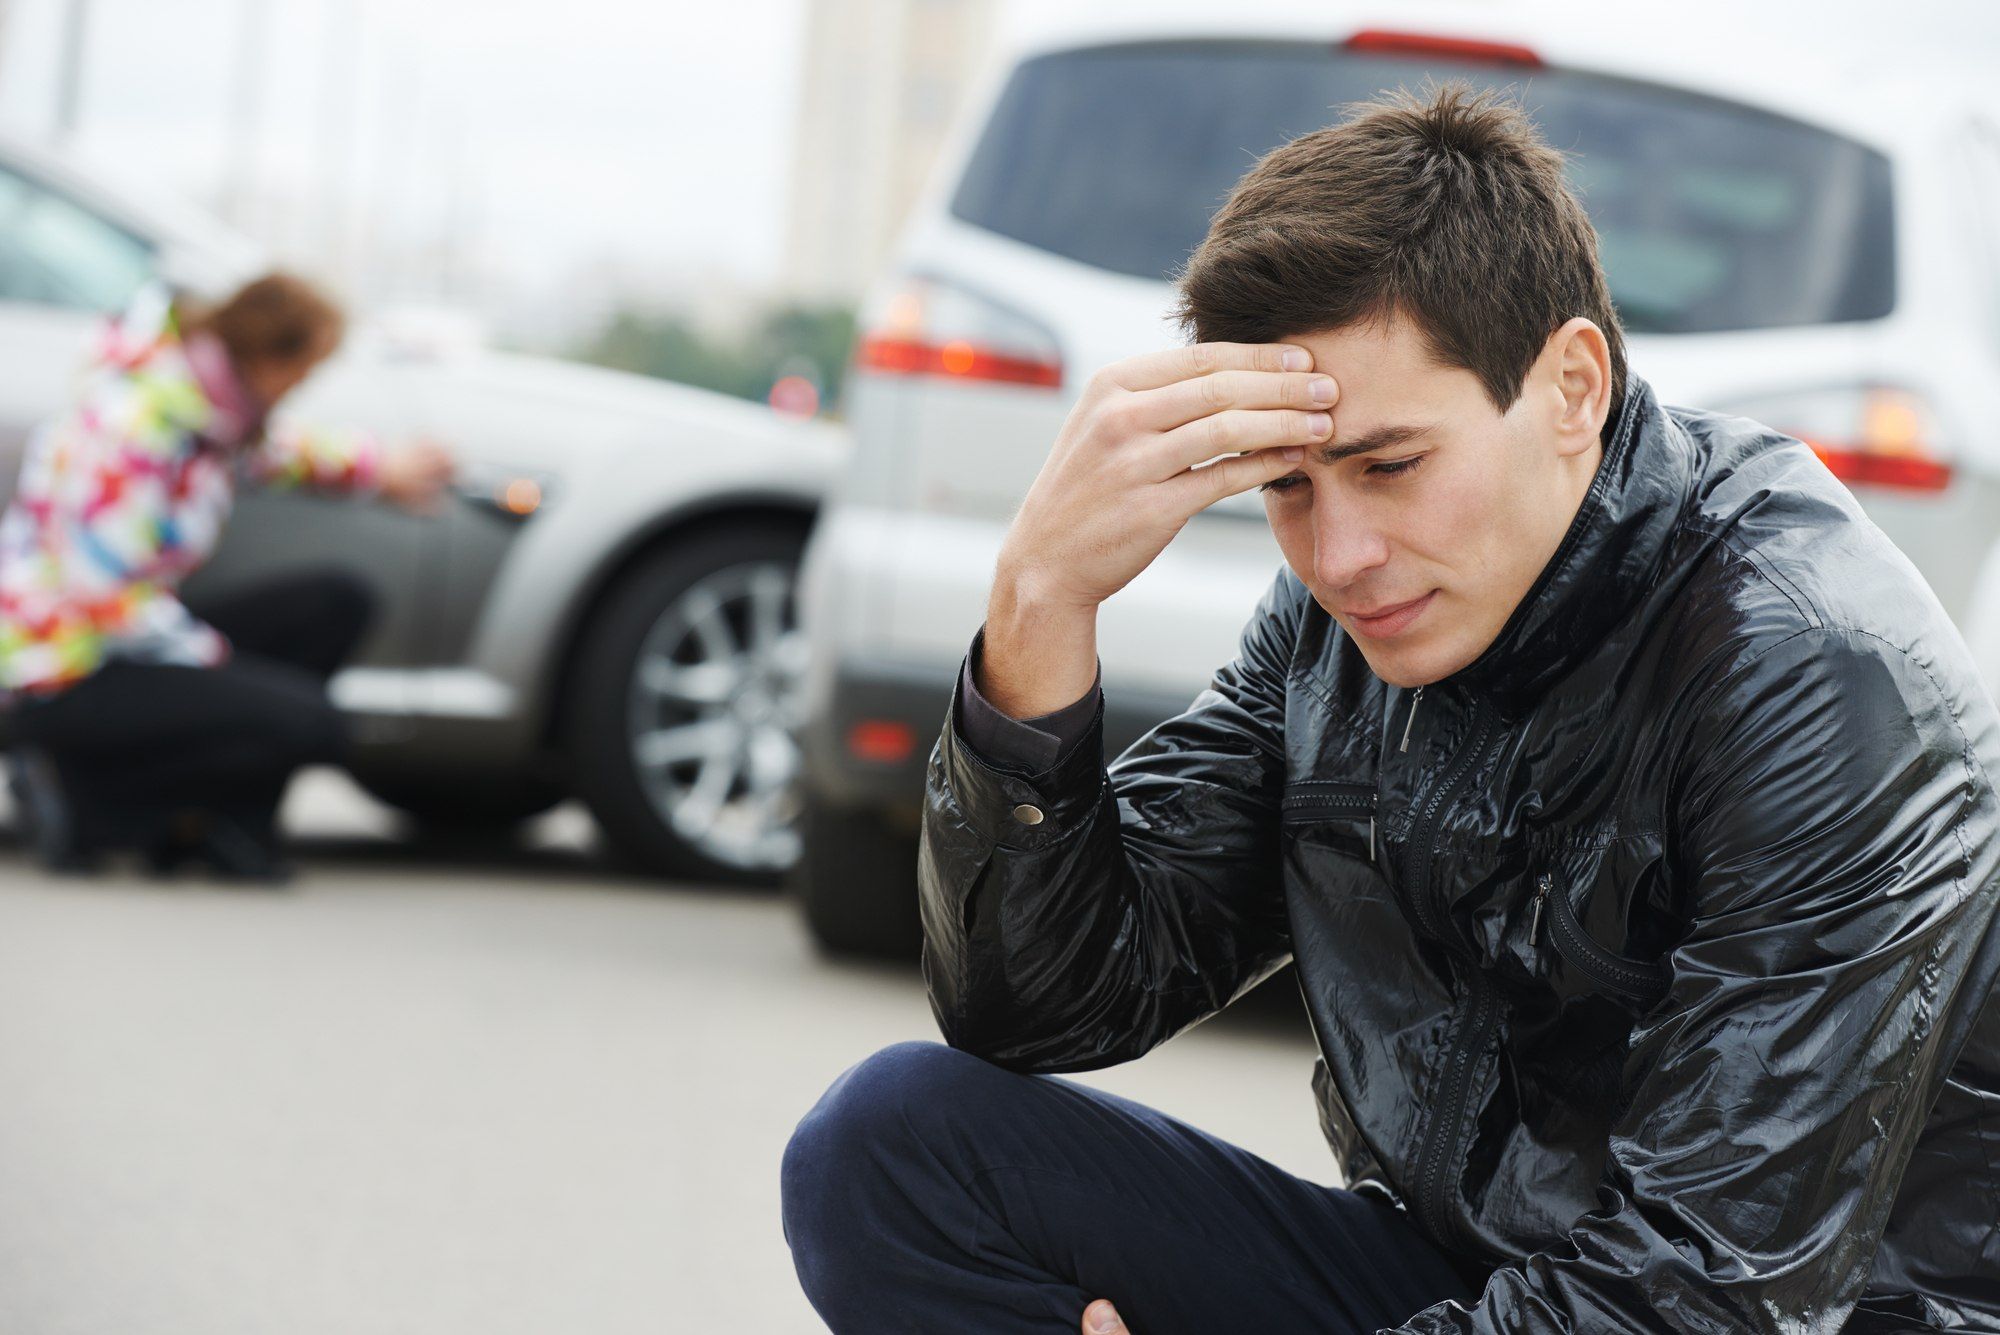 Young man appears upset and sits on curb after car accident